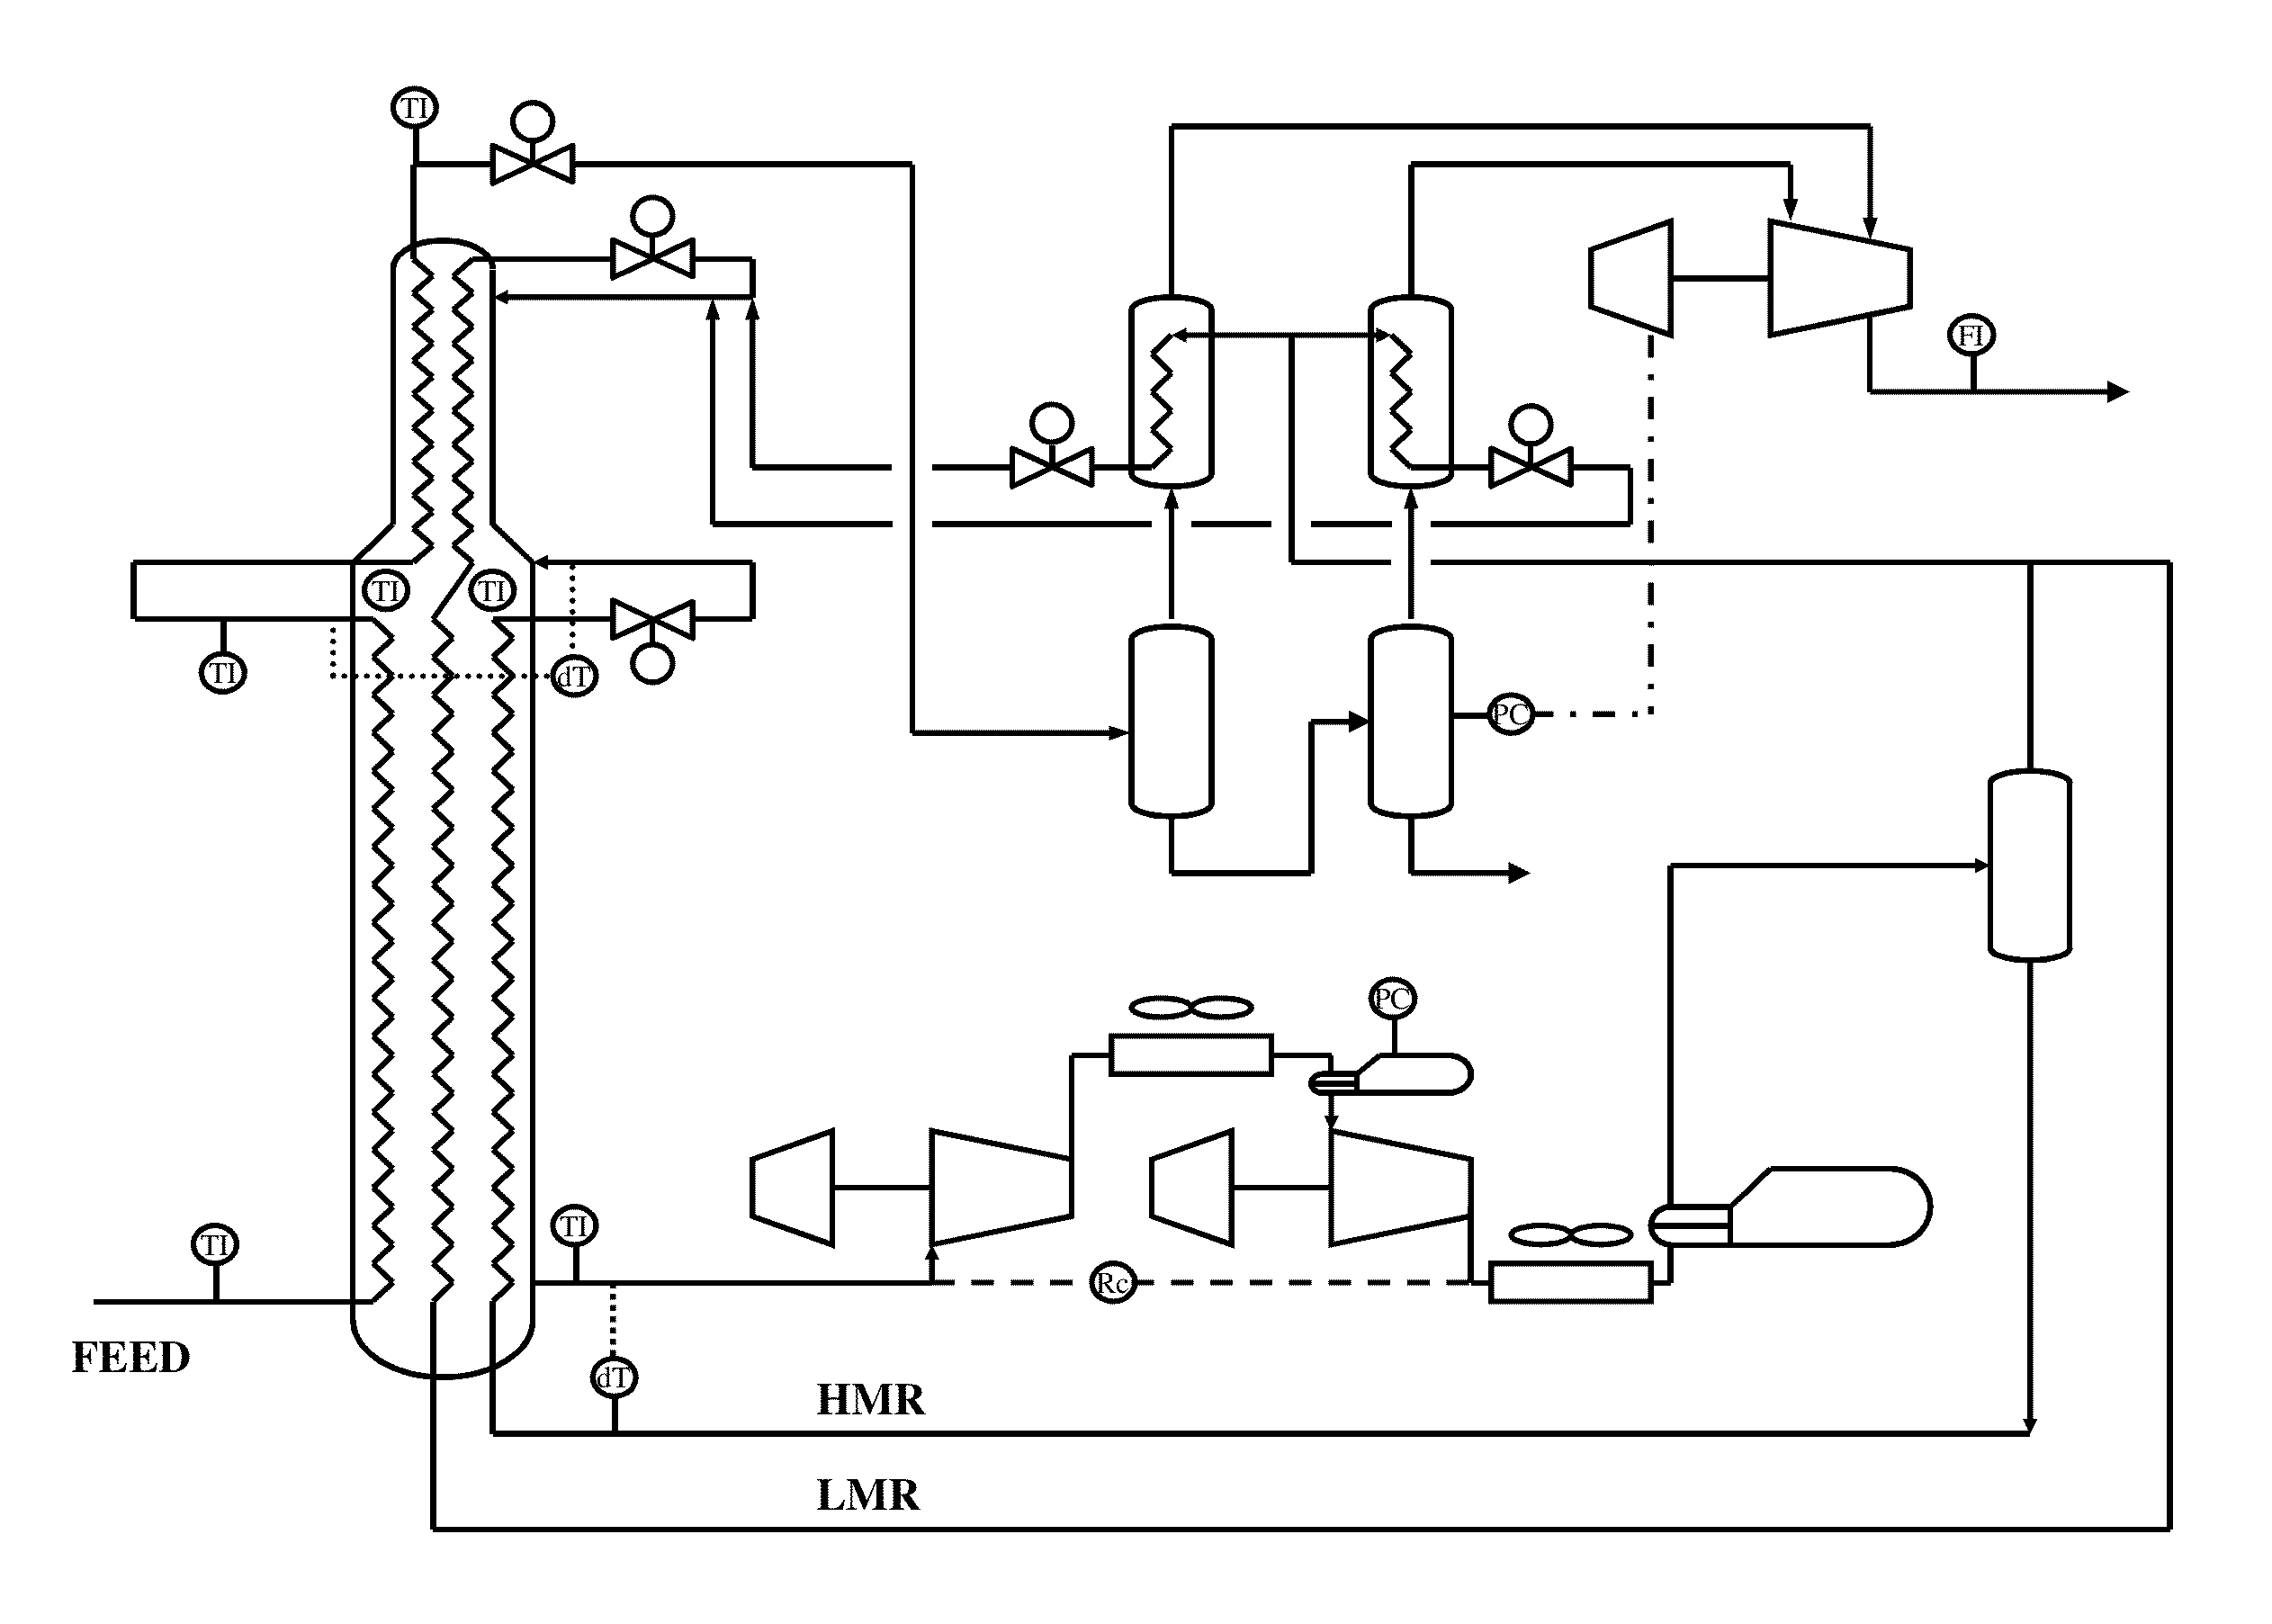 Rebalancing a main heat exchanger in a process for liquefying a tube side stream